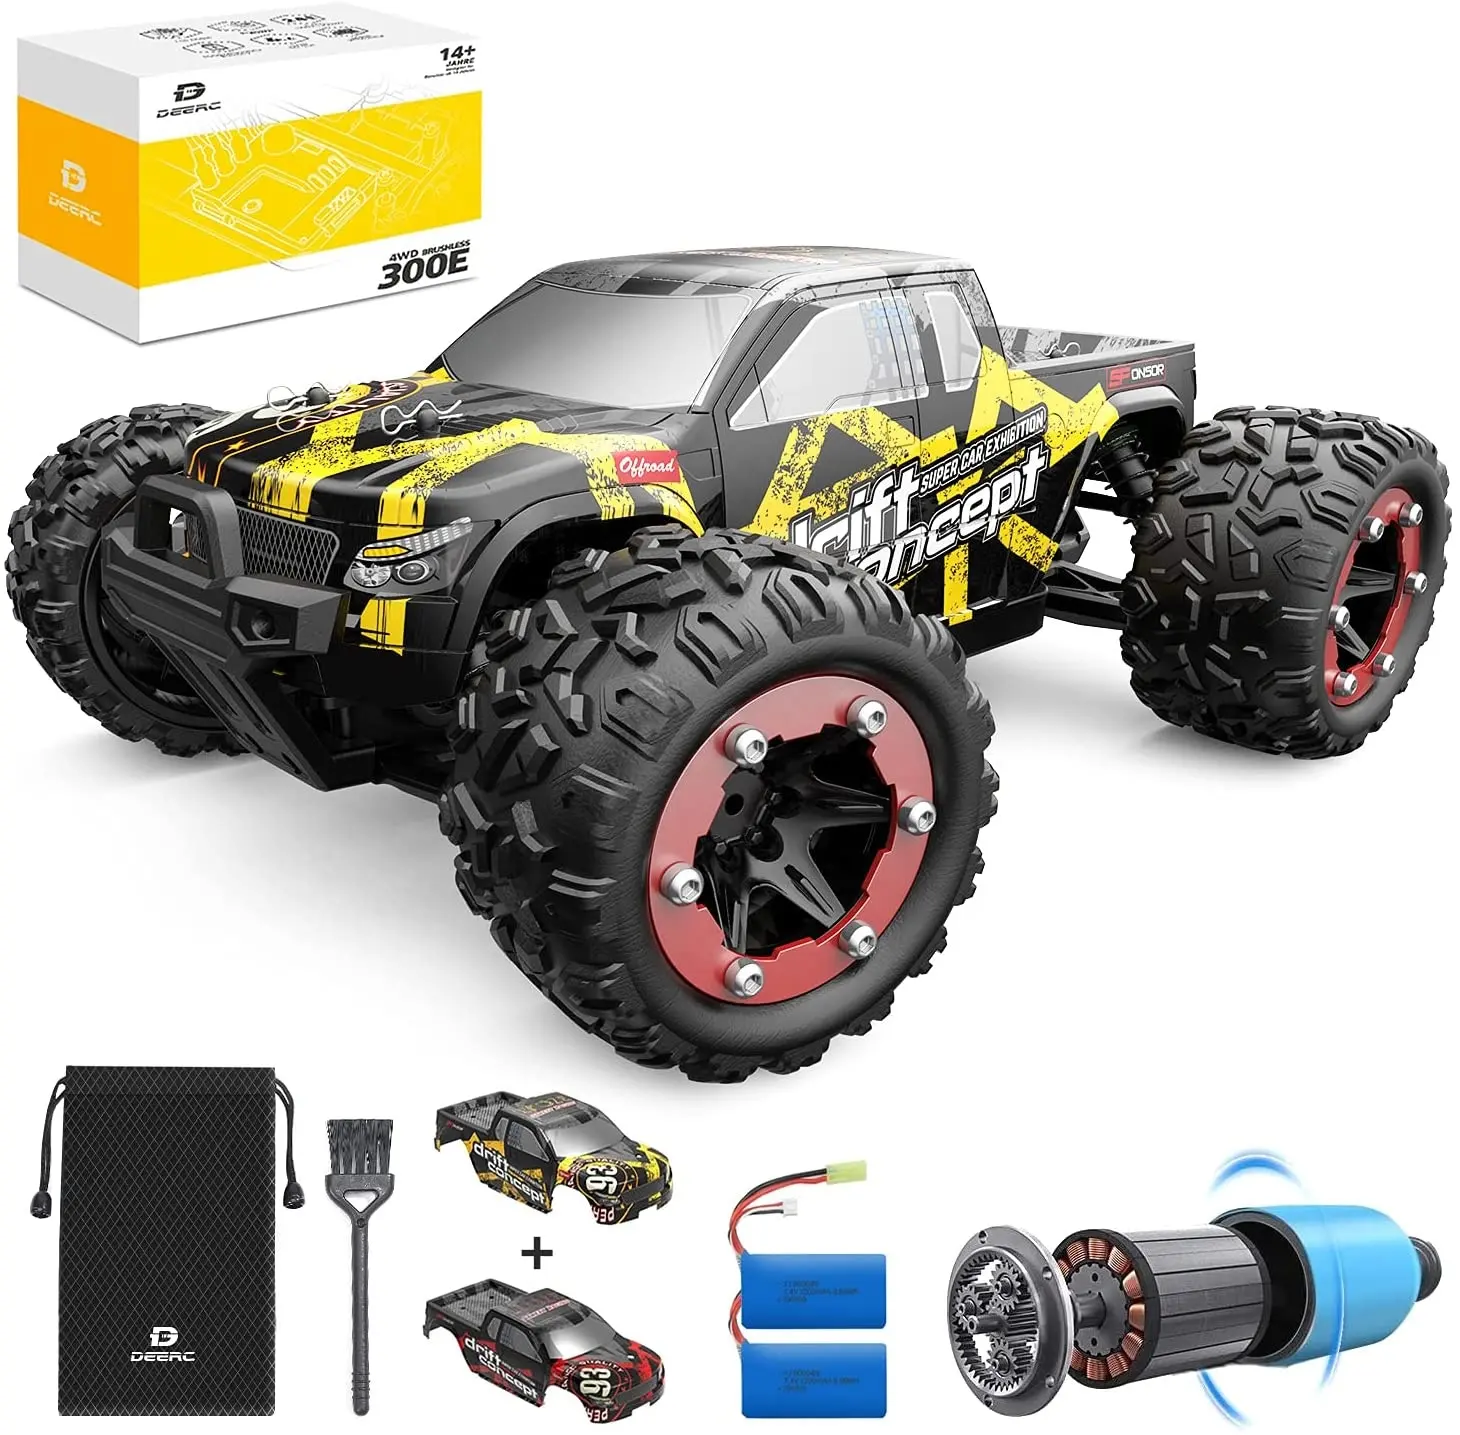 DEERC Brushless RC Cars 300E 60KM/H High Speed Remote Control Car 4WD 1:18 Scale Monster Truck for Kids Adults